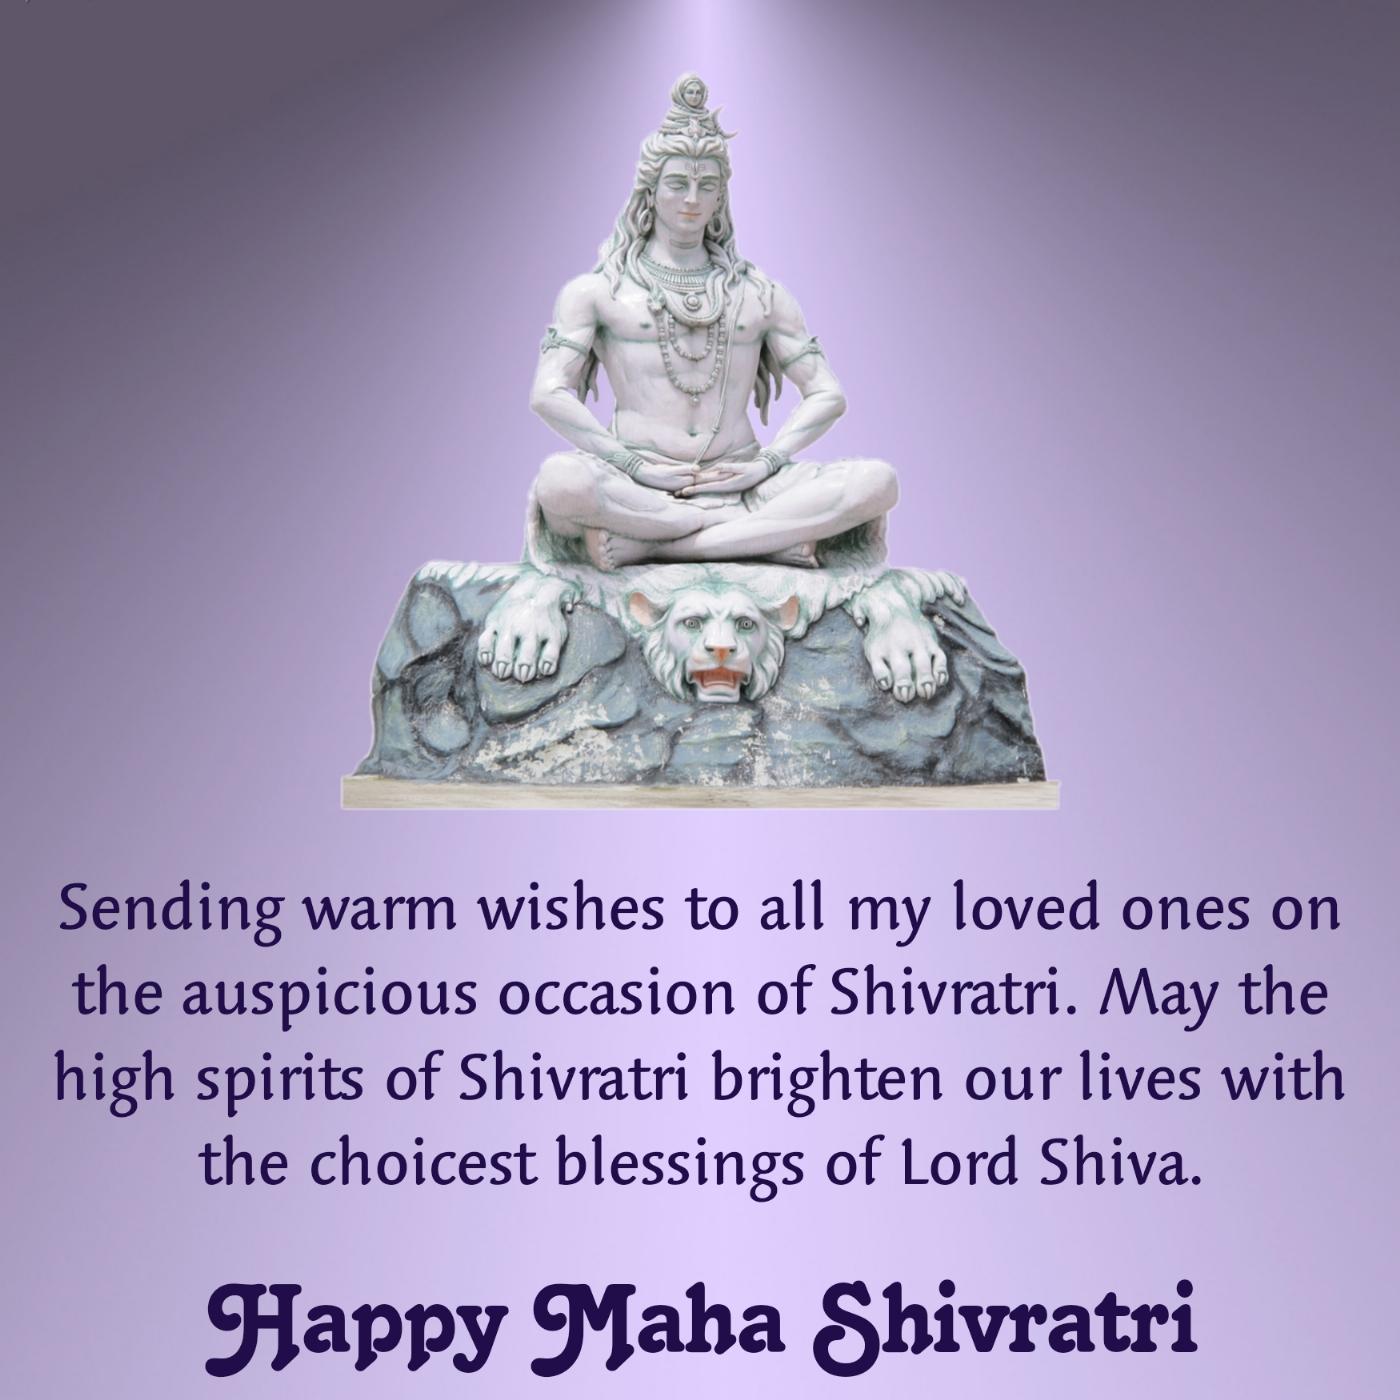 Sending warm wishes to all my loved ones on the auspicious occasion of Shivratri